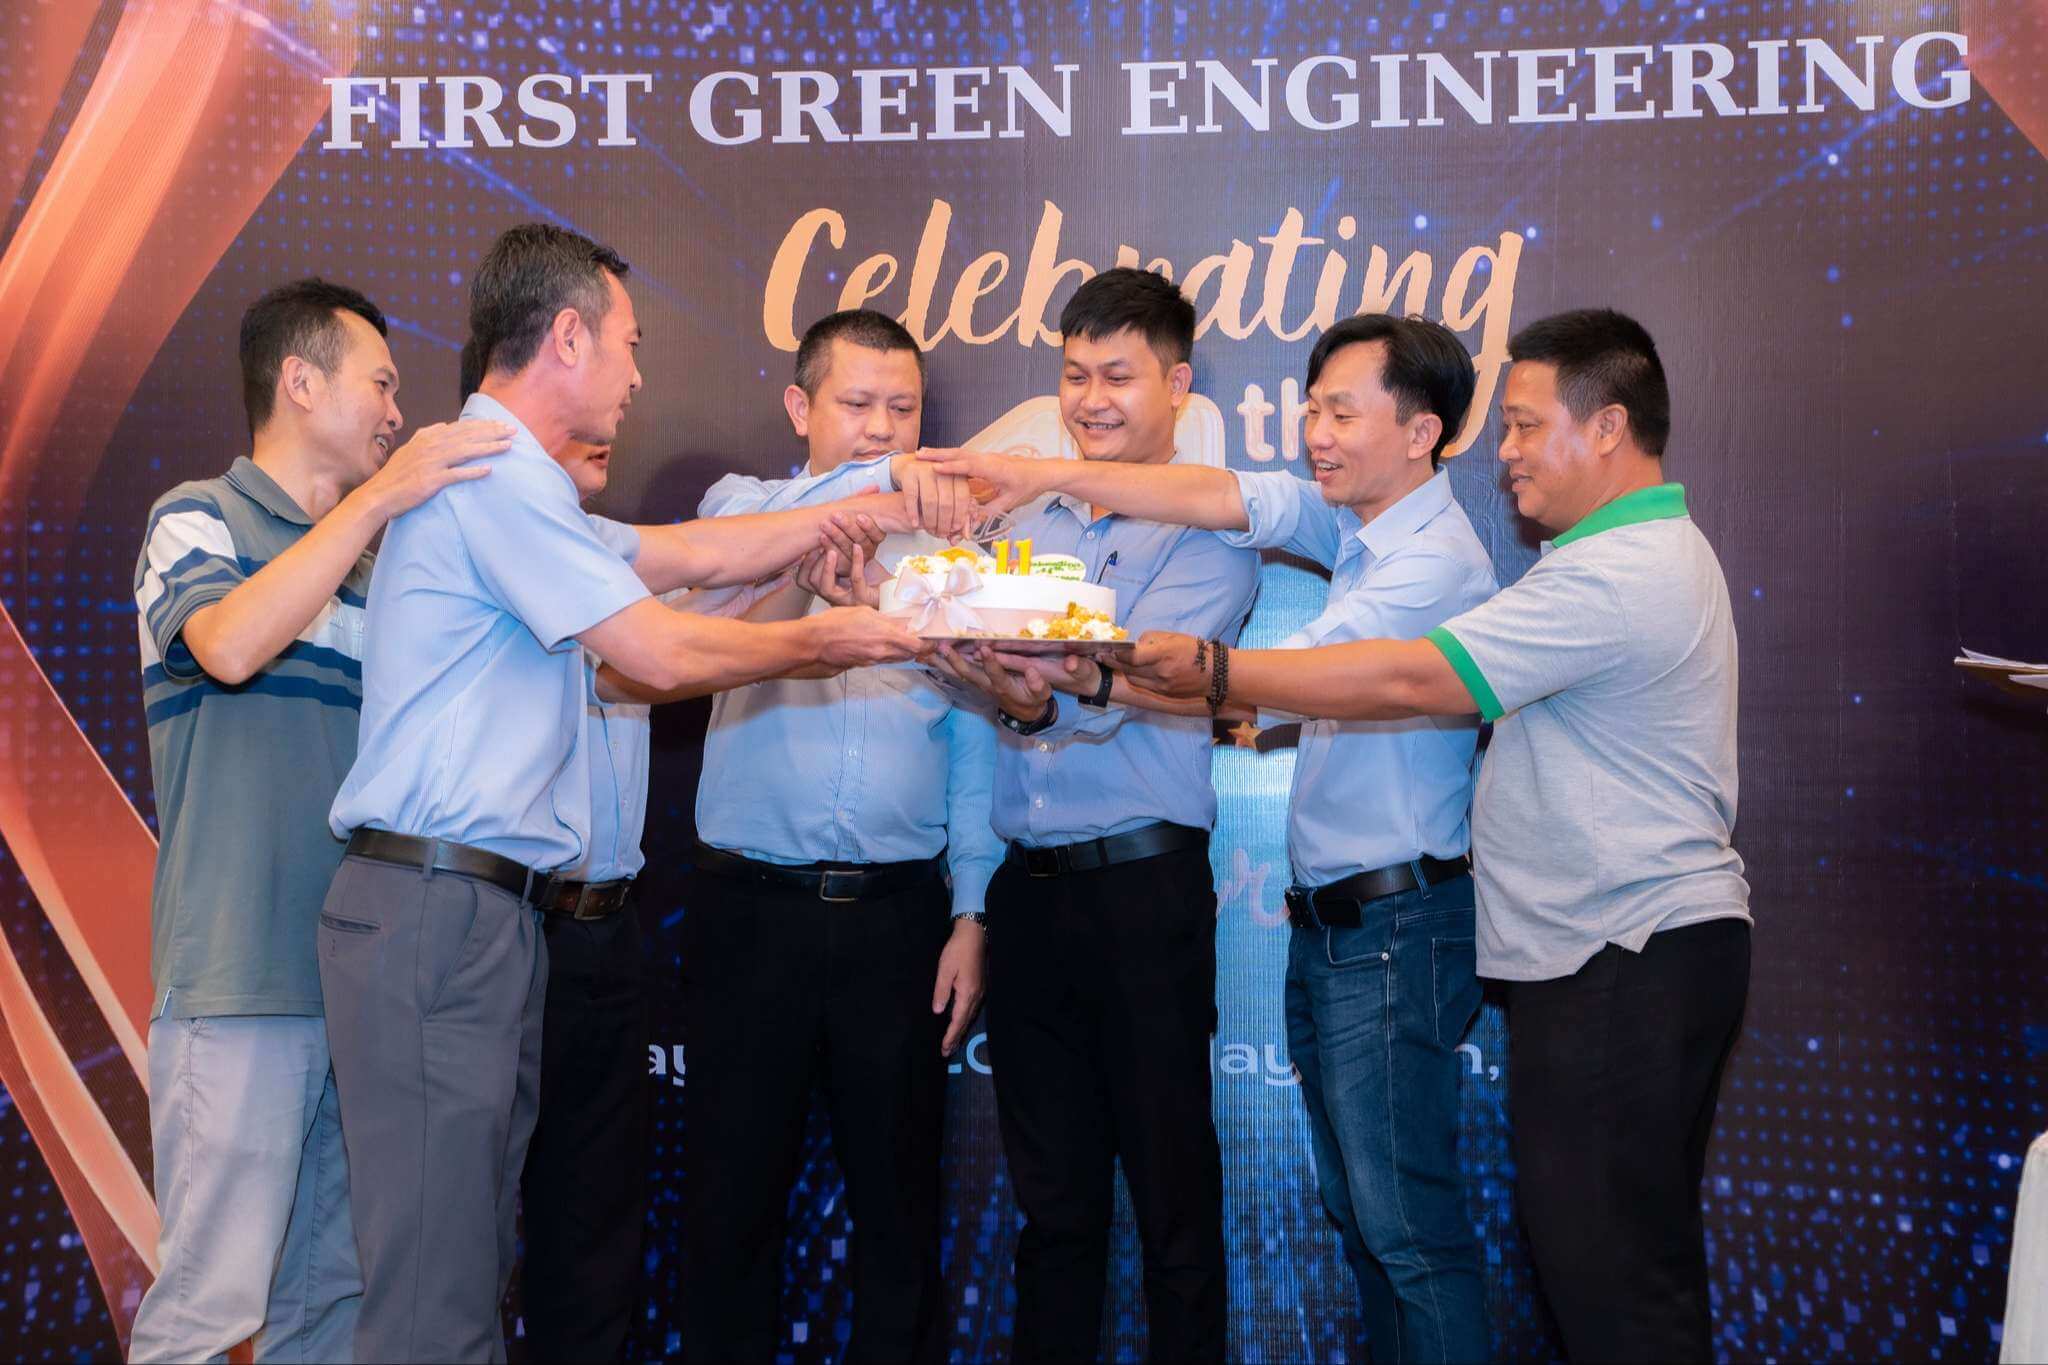 CONGRATULATIONS ON THE 11TH ANNIVERSARY OF FIRST GREEN ENGINEERING